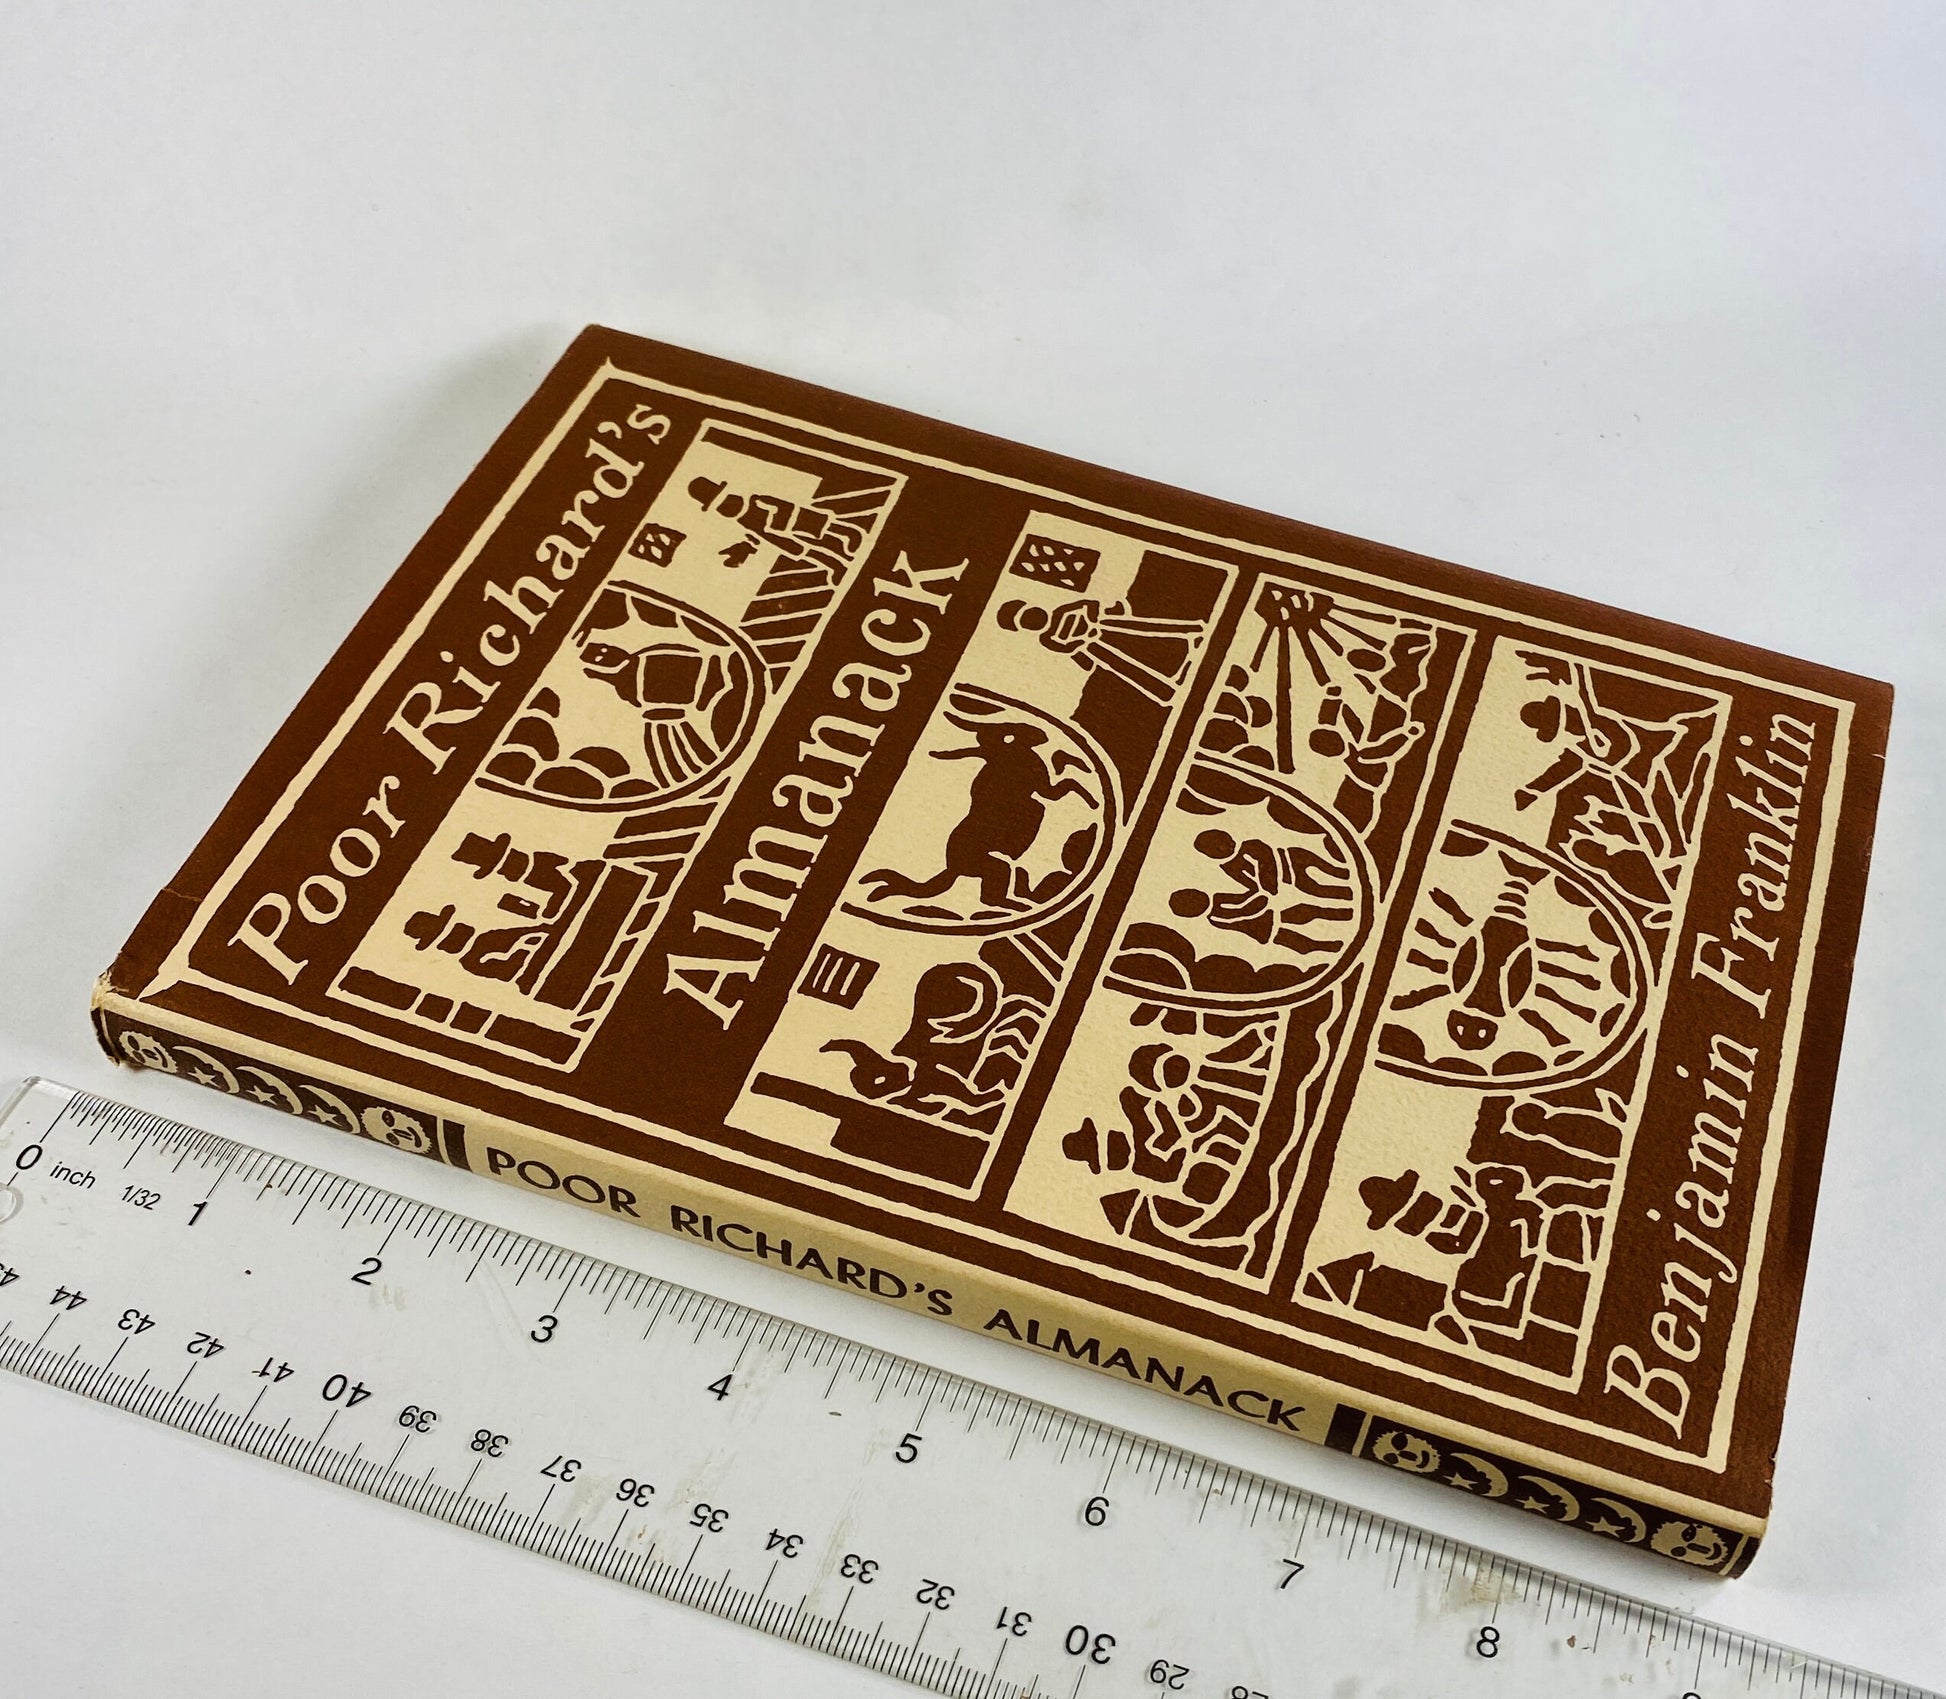 1932 Poor Richard's Almanack vintage Benjamin Franklin book reprinted by Peter Pauper Press with dust jacket. Father's Day gift collectible